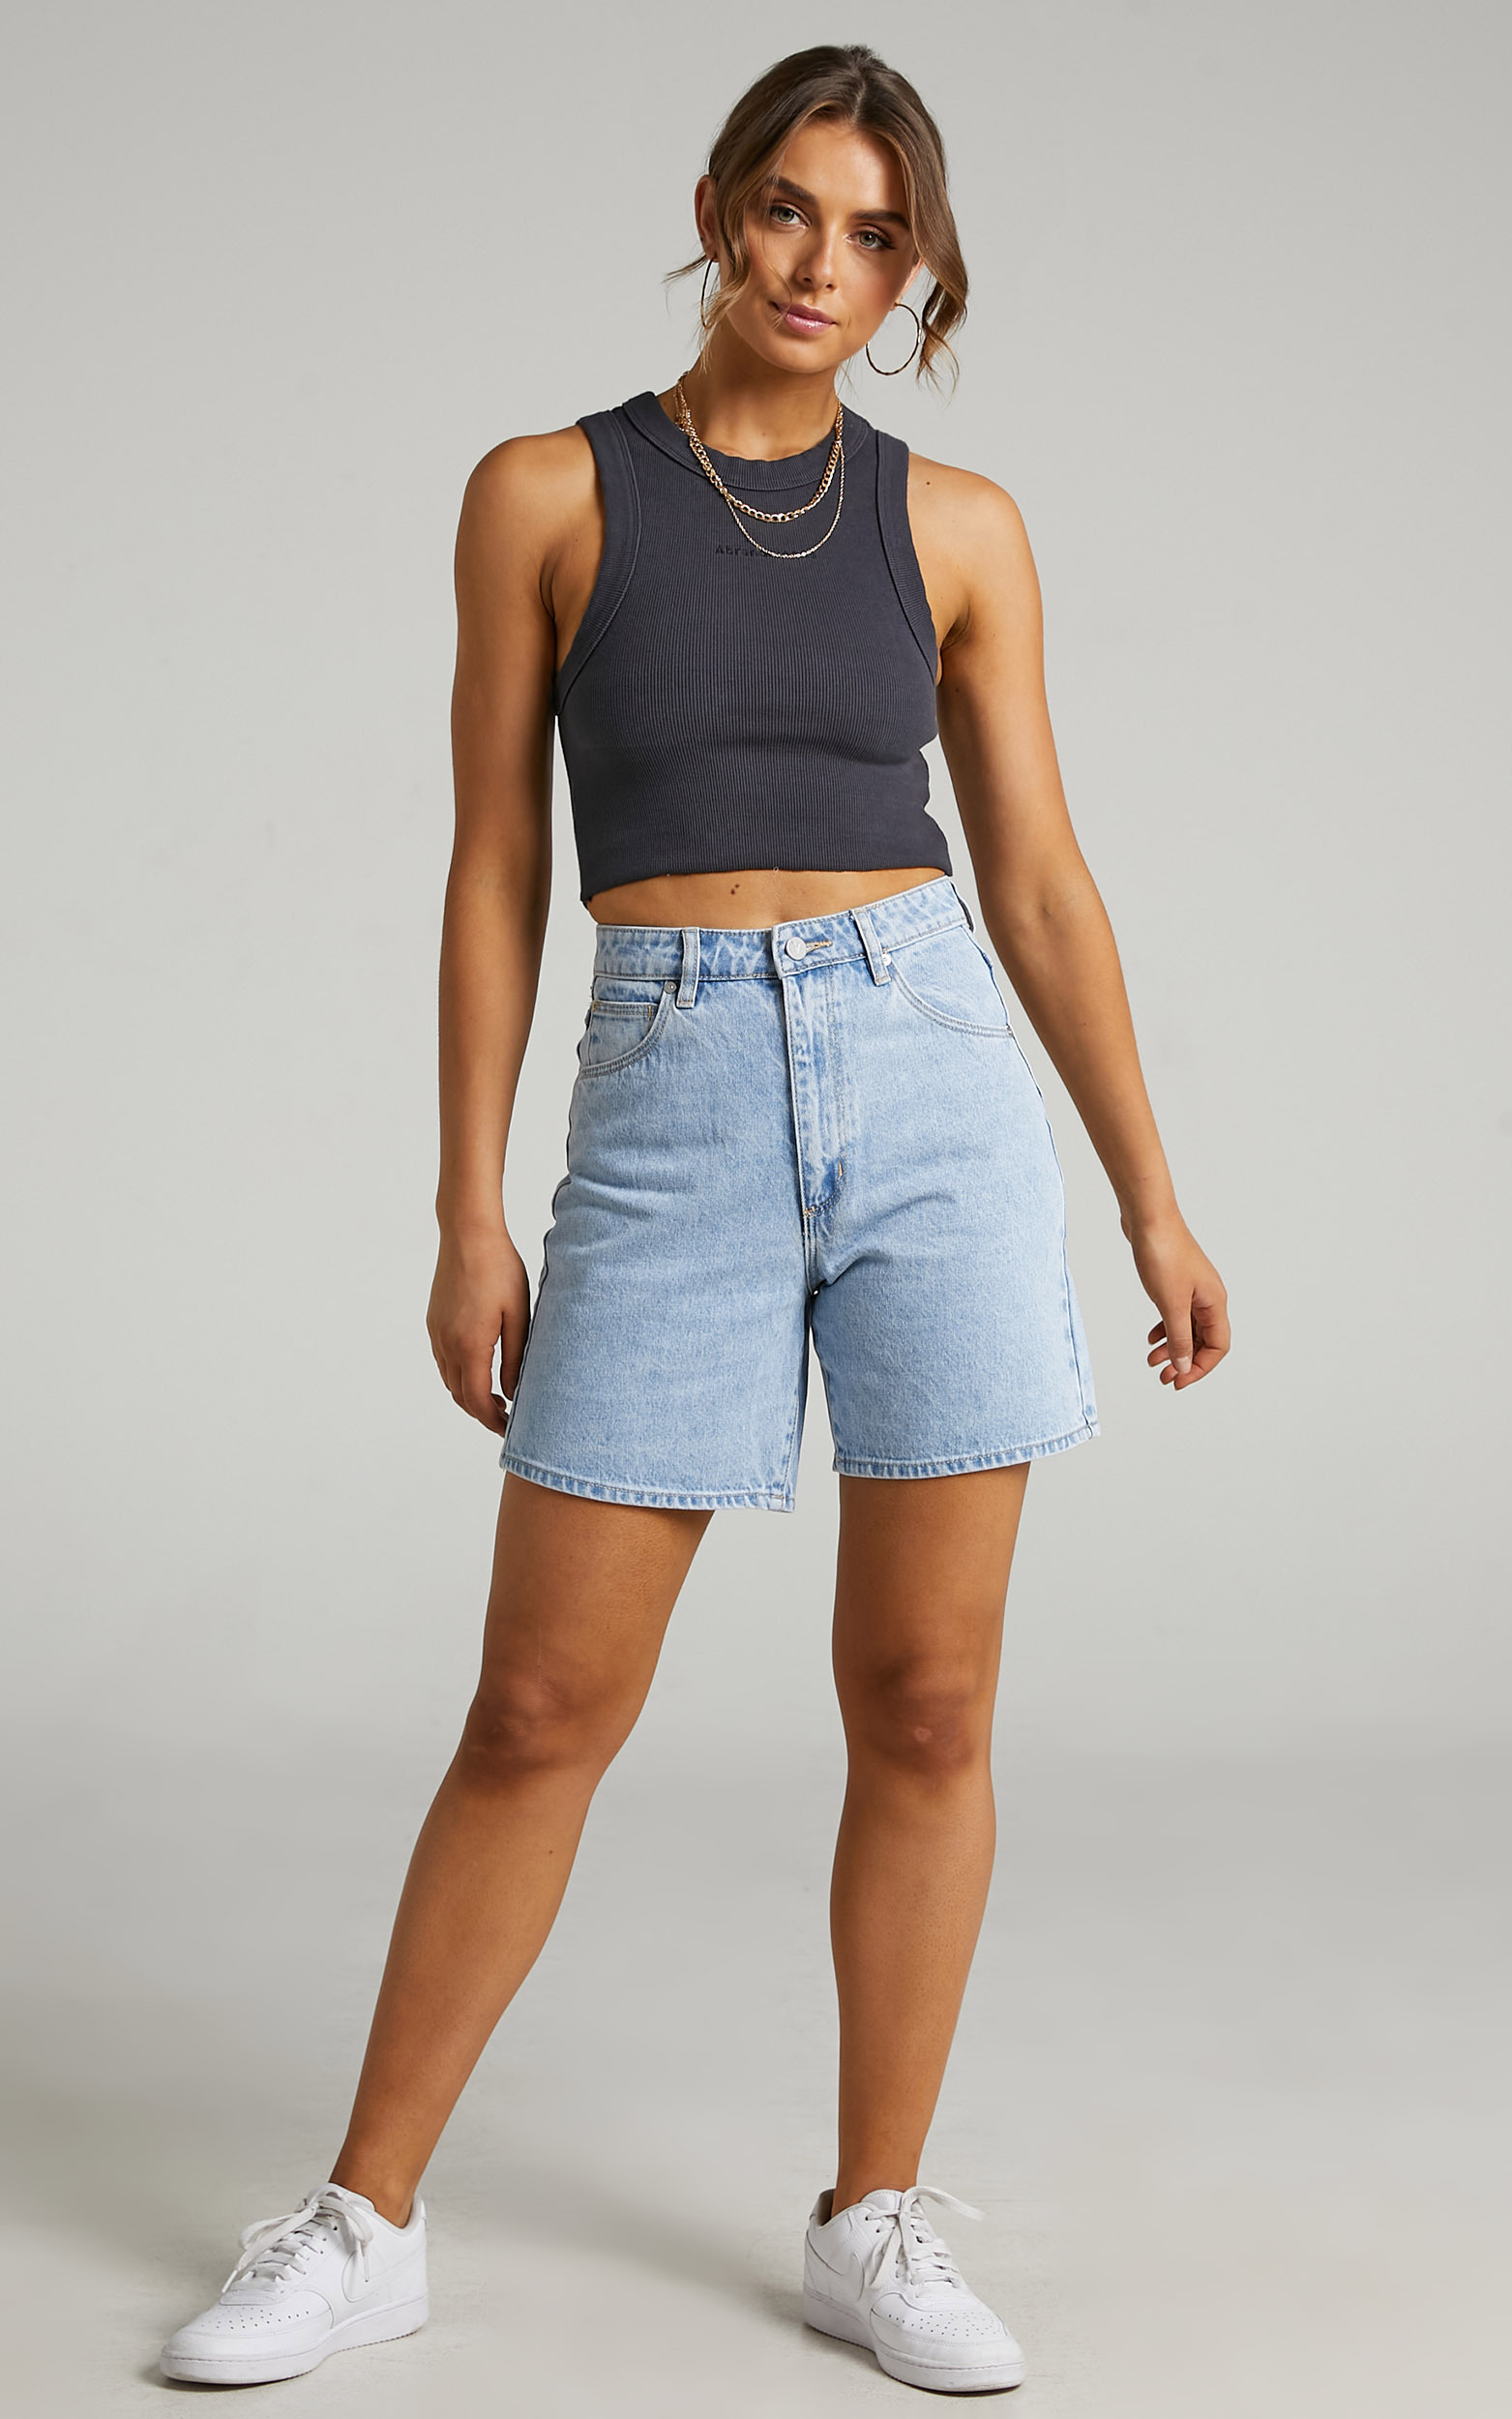 Abrand - A Carrie Denim Short in Walk Away - 06, BLU1, hi-res image number null